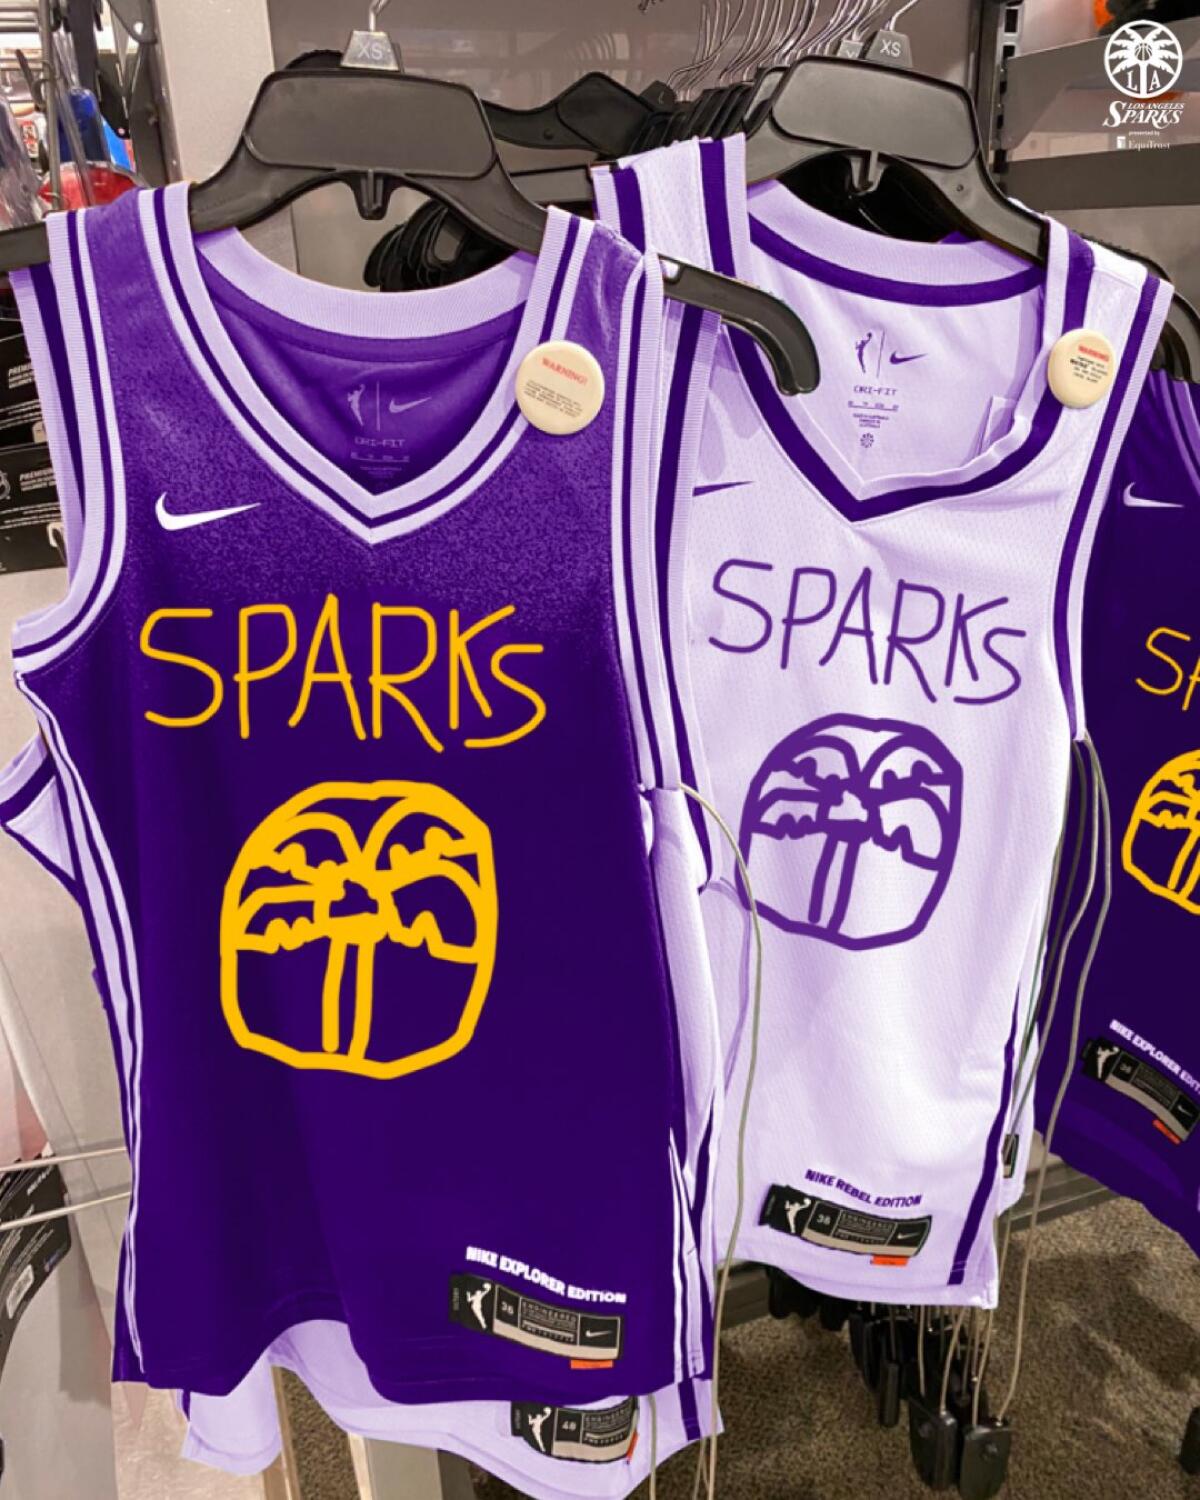 Los Angeles Sparks April Fool's jerseys hanging on a rack